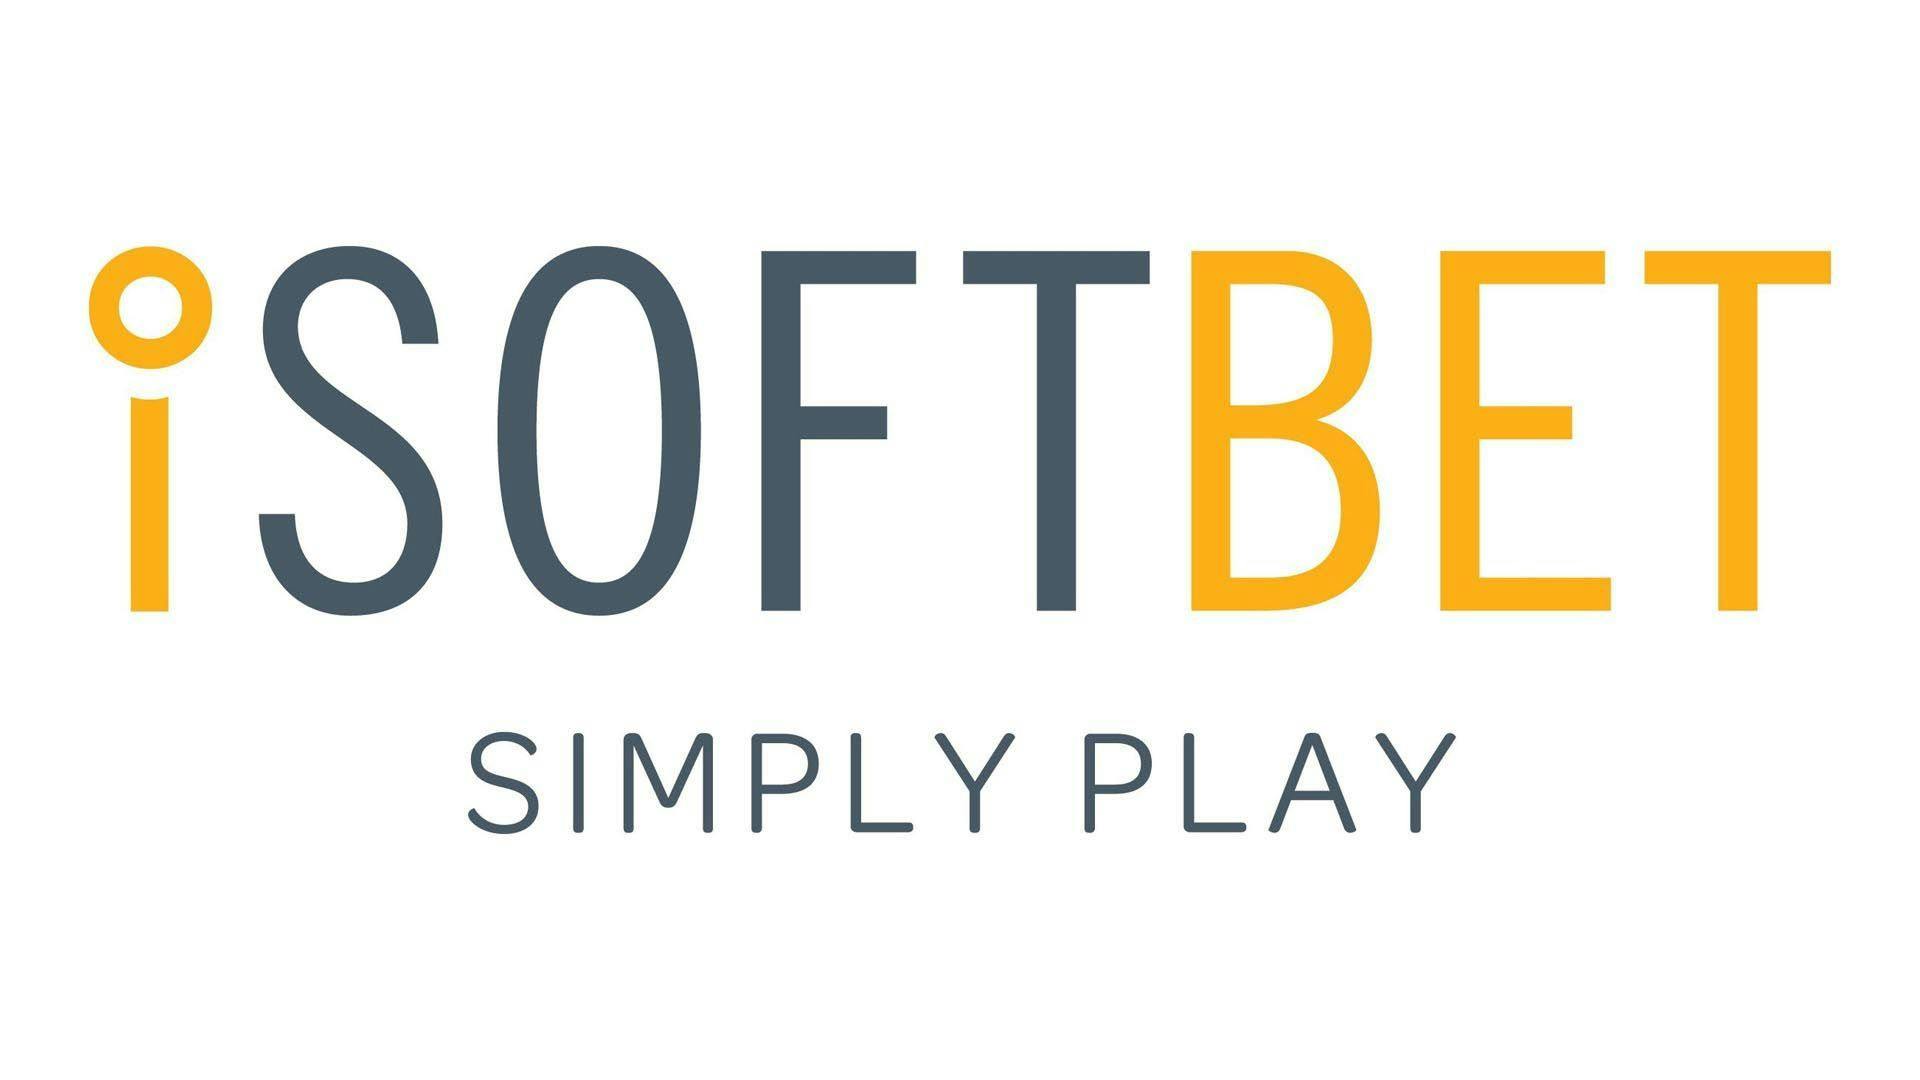 iSoftBet Producer Free Online Games